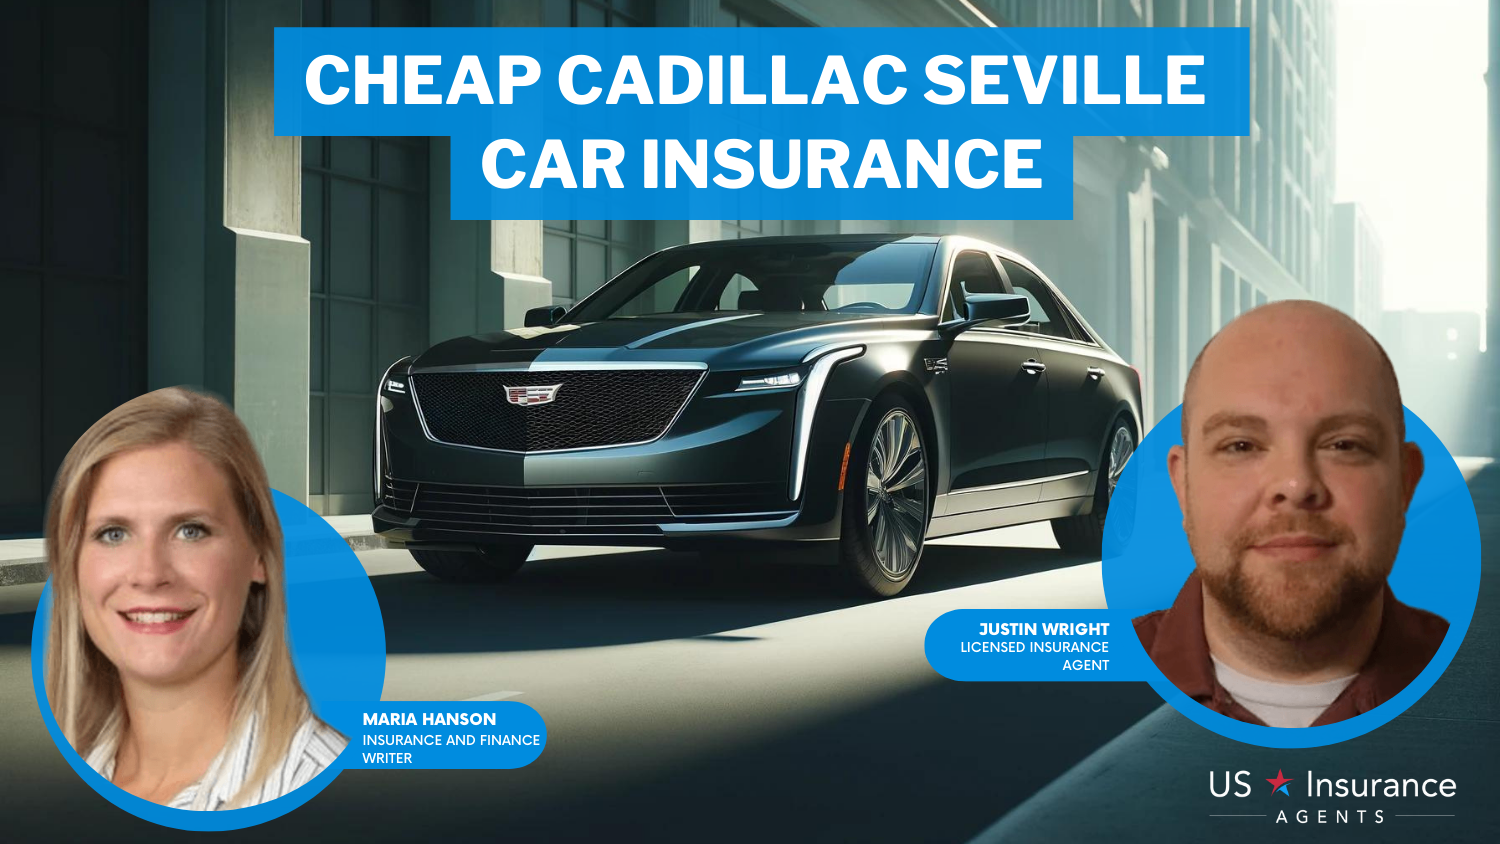 Cheap Cadillac Seville Car Insurance: The Hartford, State Farm and Nationwide